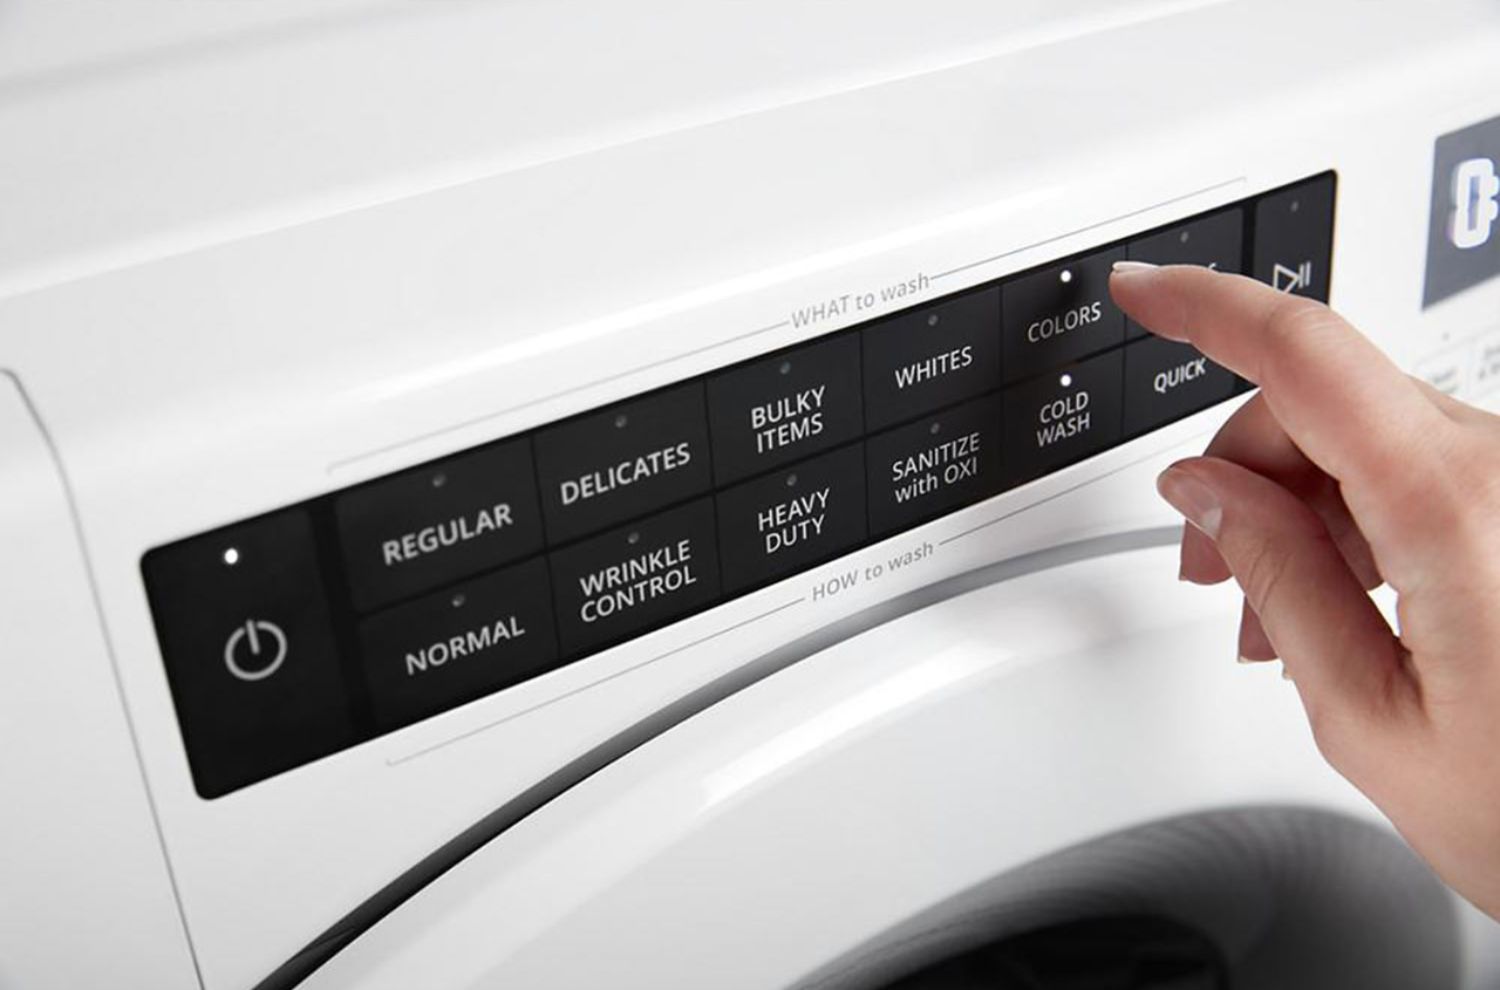 Whirlpool 4.5 cu. ft. 8-Cycle High-Efficiency Front Load Washer WFW75HEFW -  Best Buy